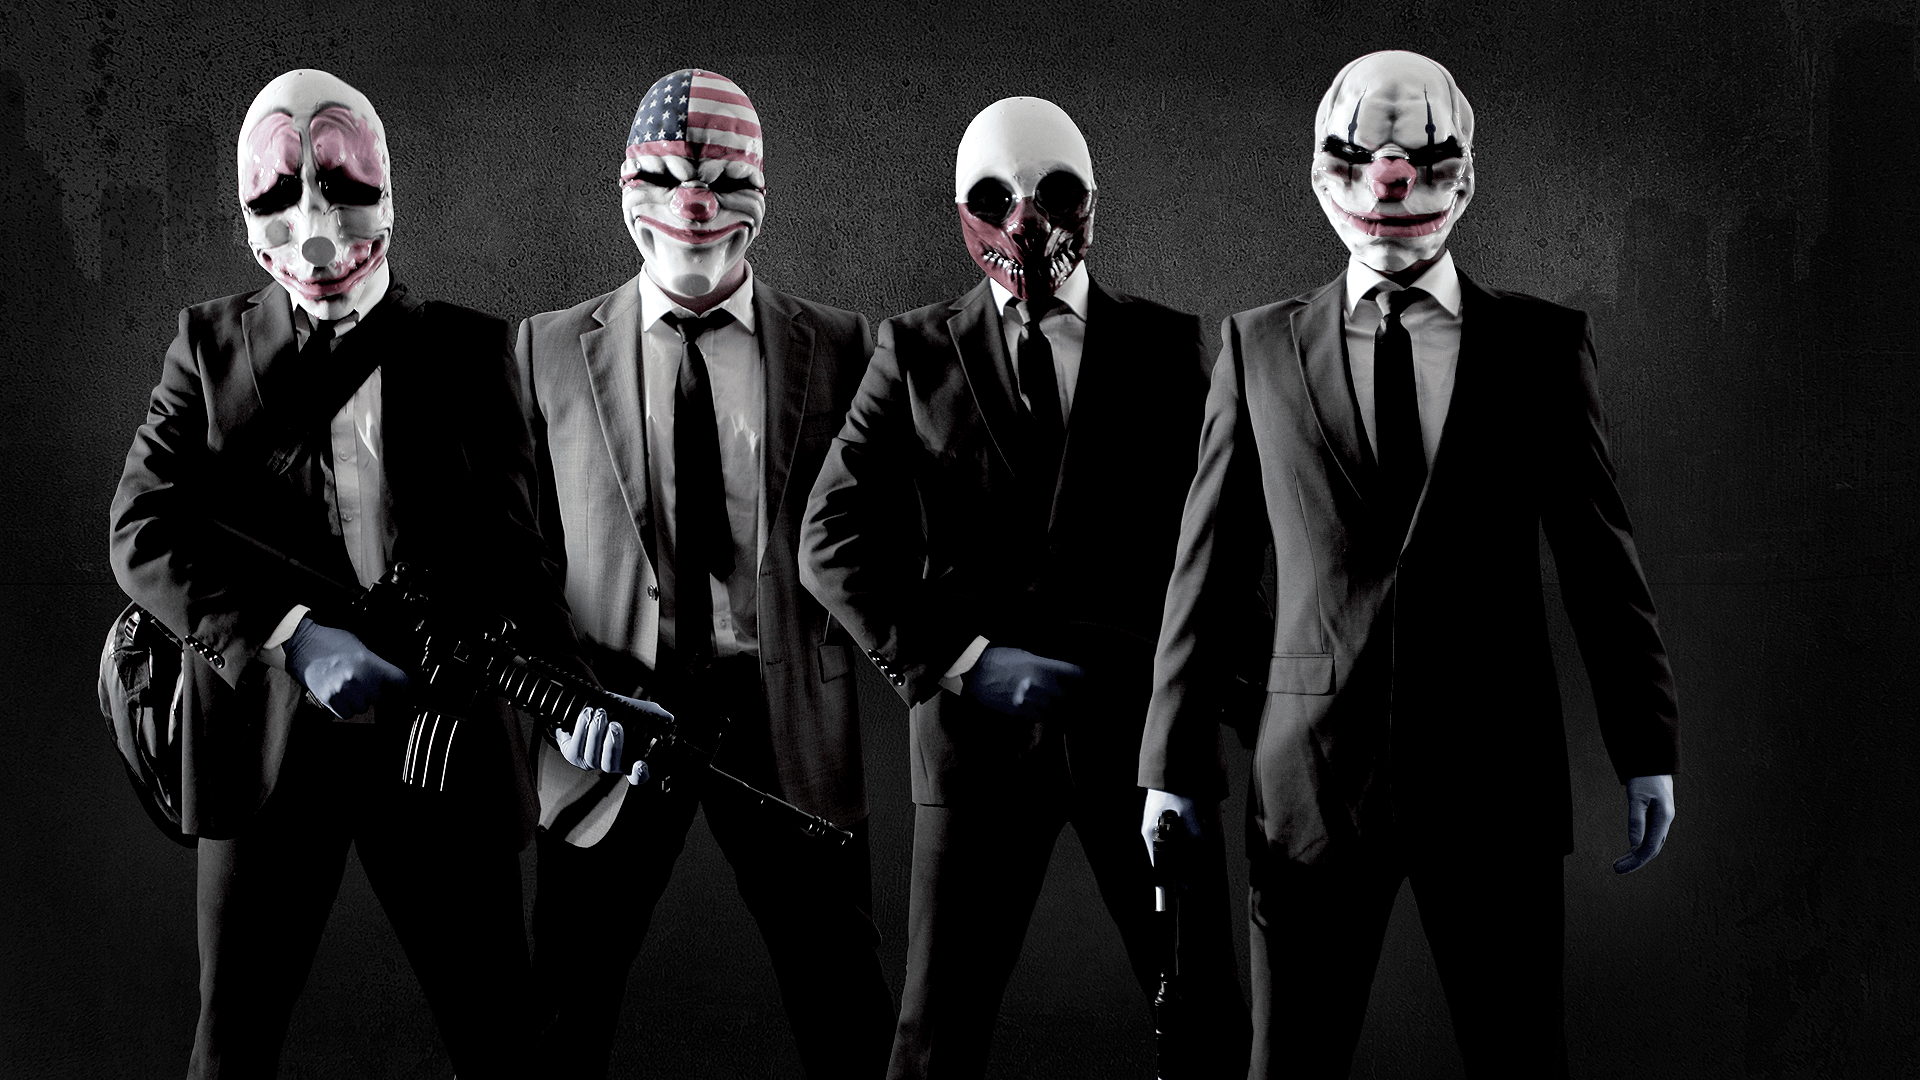 download free payday 2 character